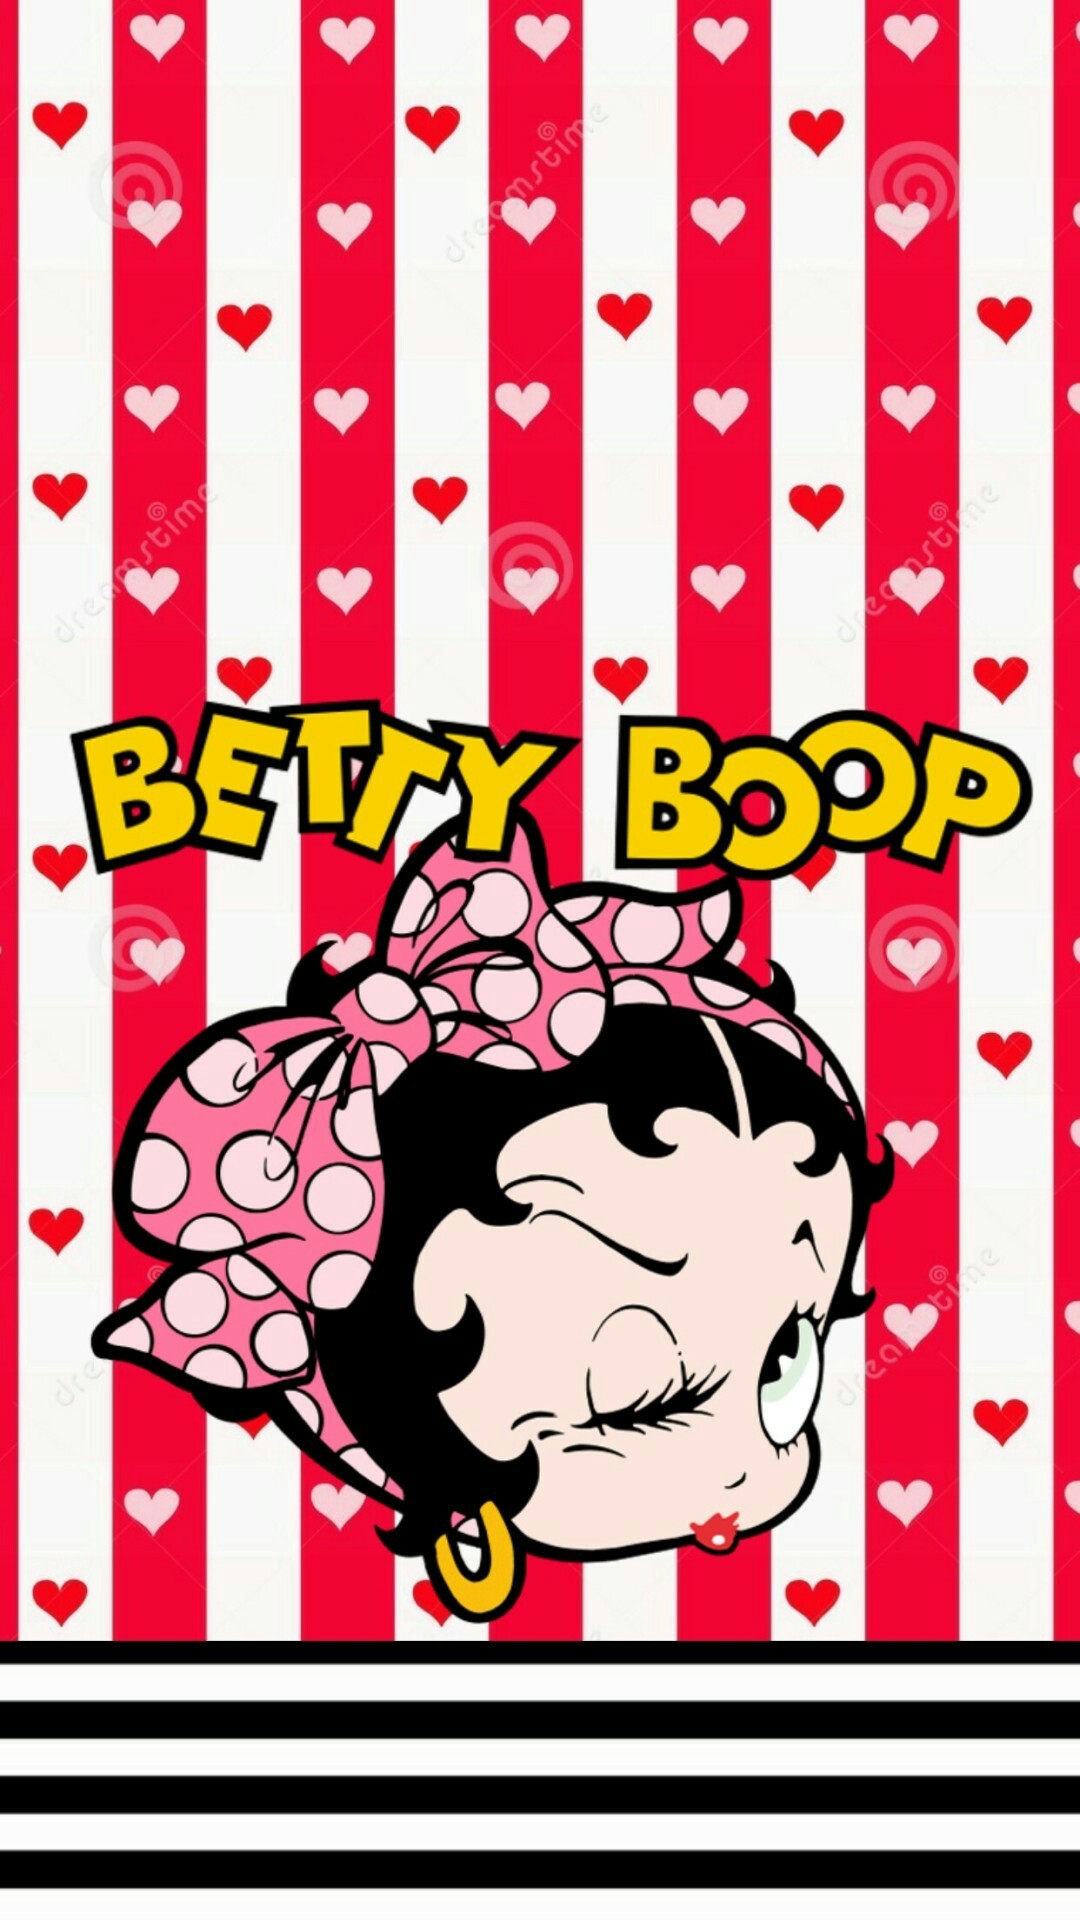 Free download Wallpaper Betty Boop 49 images [1080x1920] for your